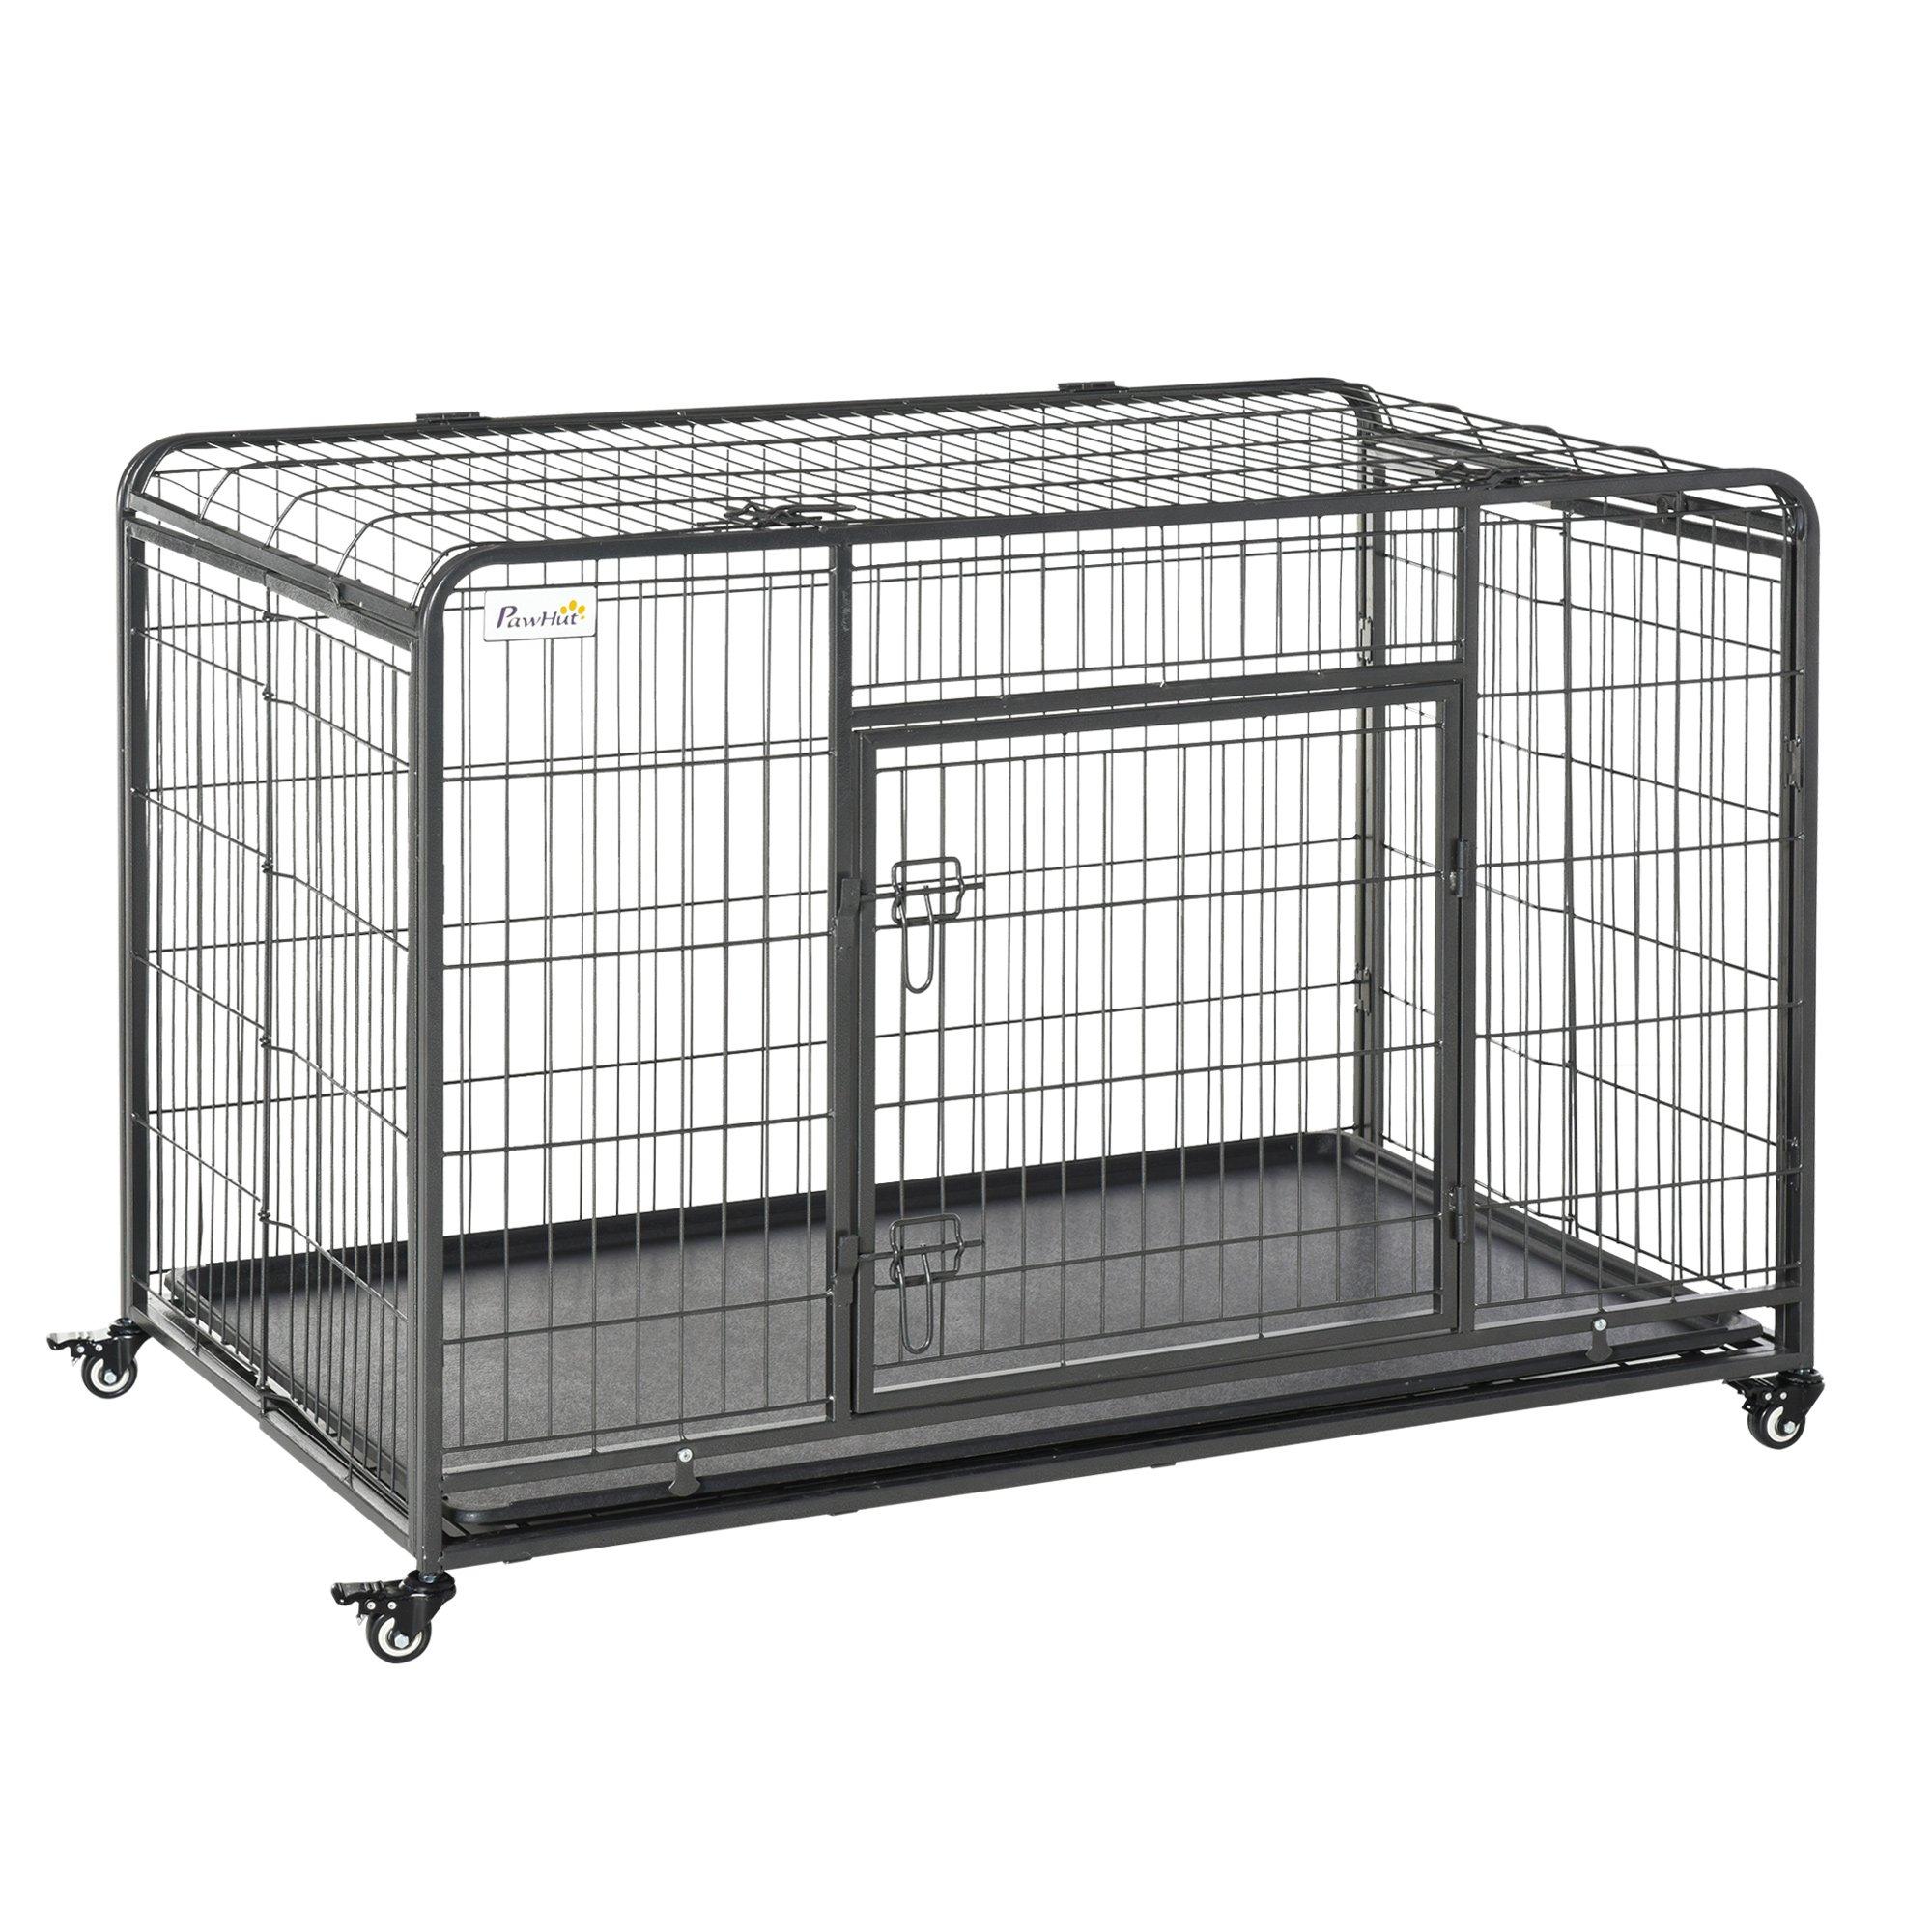 81x125cm Metal Dog Cage Kennel with Locking Door Wheels Tray for Extra Large Pets